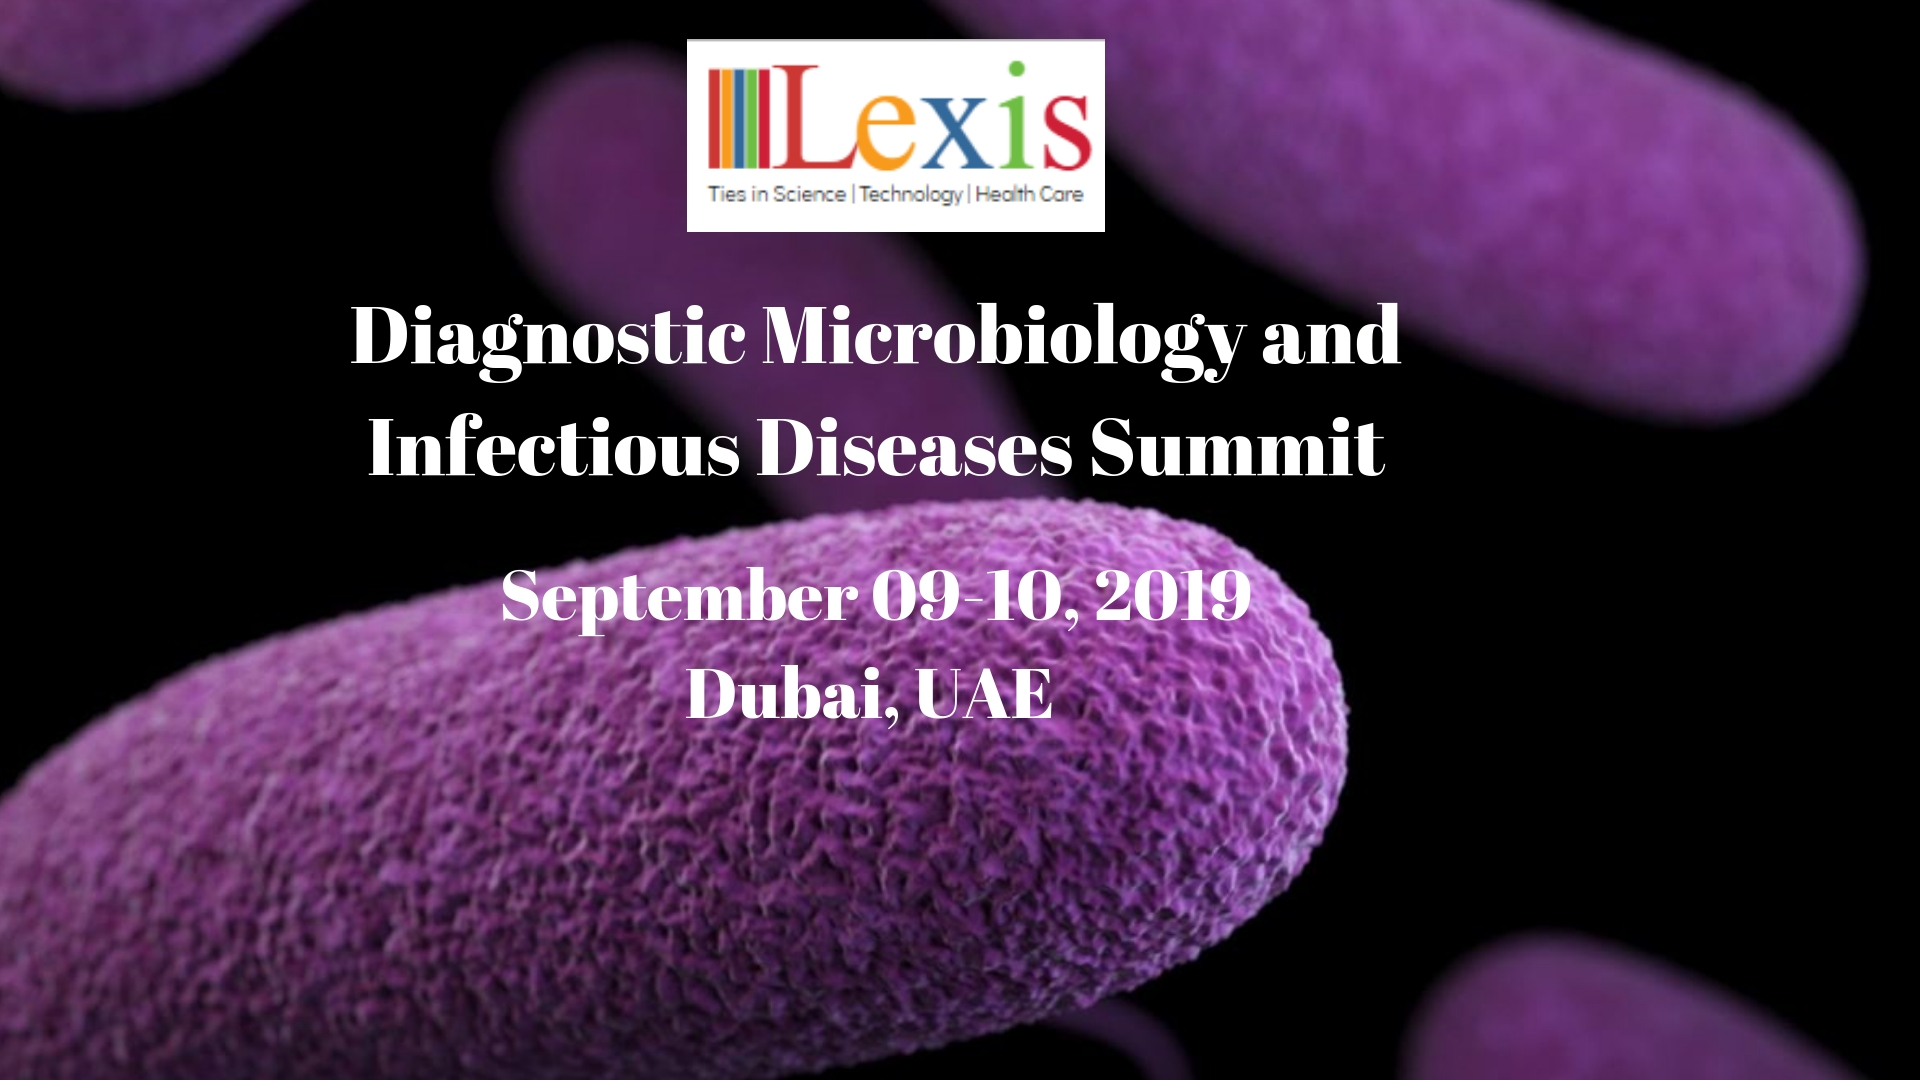 Diagnostic Microbiology and Infectious Diseases Summit, Dubai, United Arab Emirates